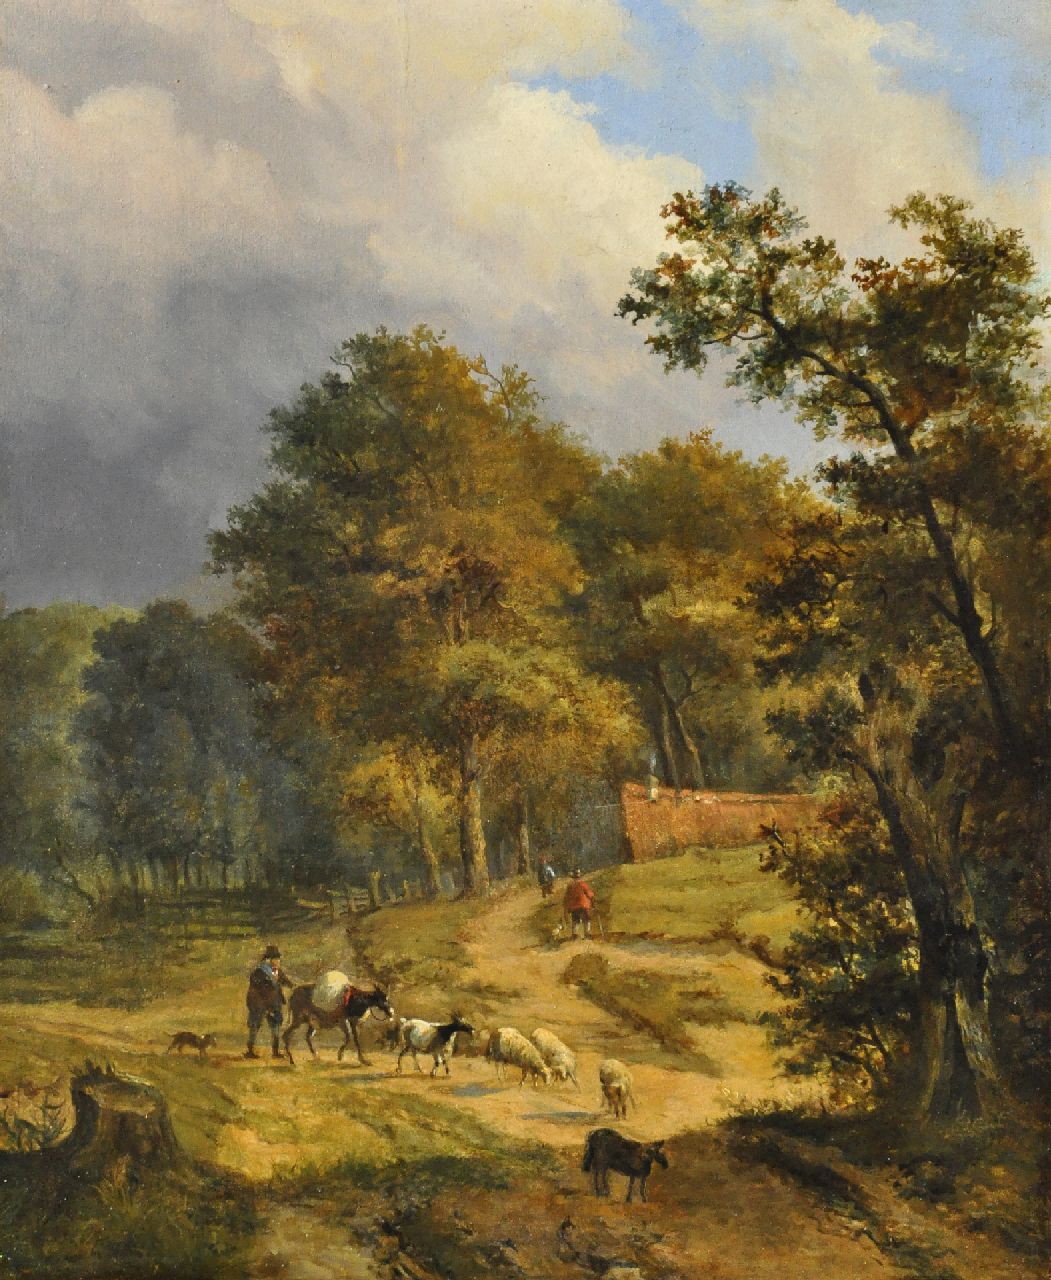 Verwee L.P.  | Louis Pierre Verwee, A shepherd and flock on a wooded path, oil on panel 33.9 x 27.7 cm